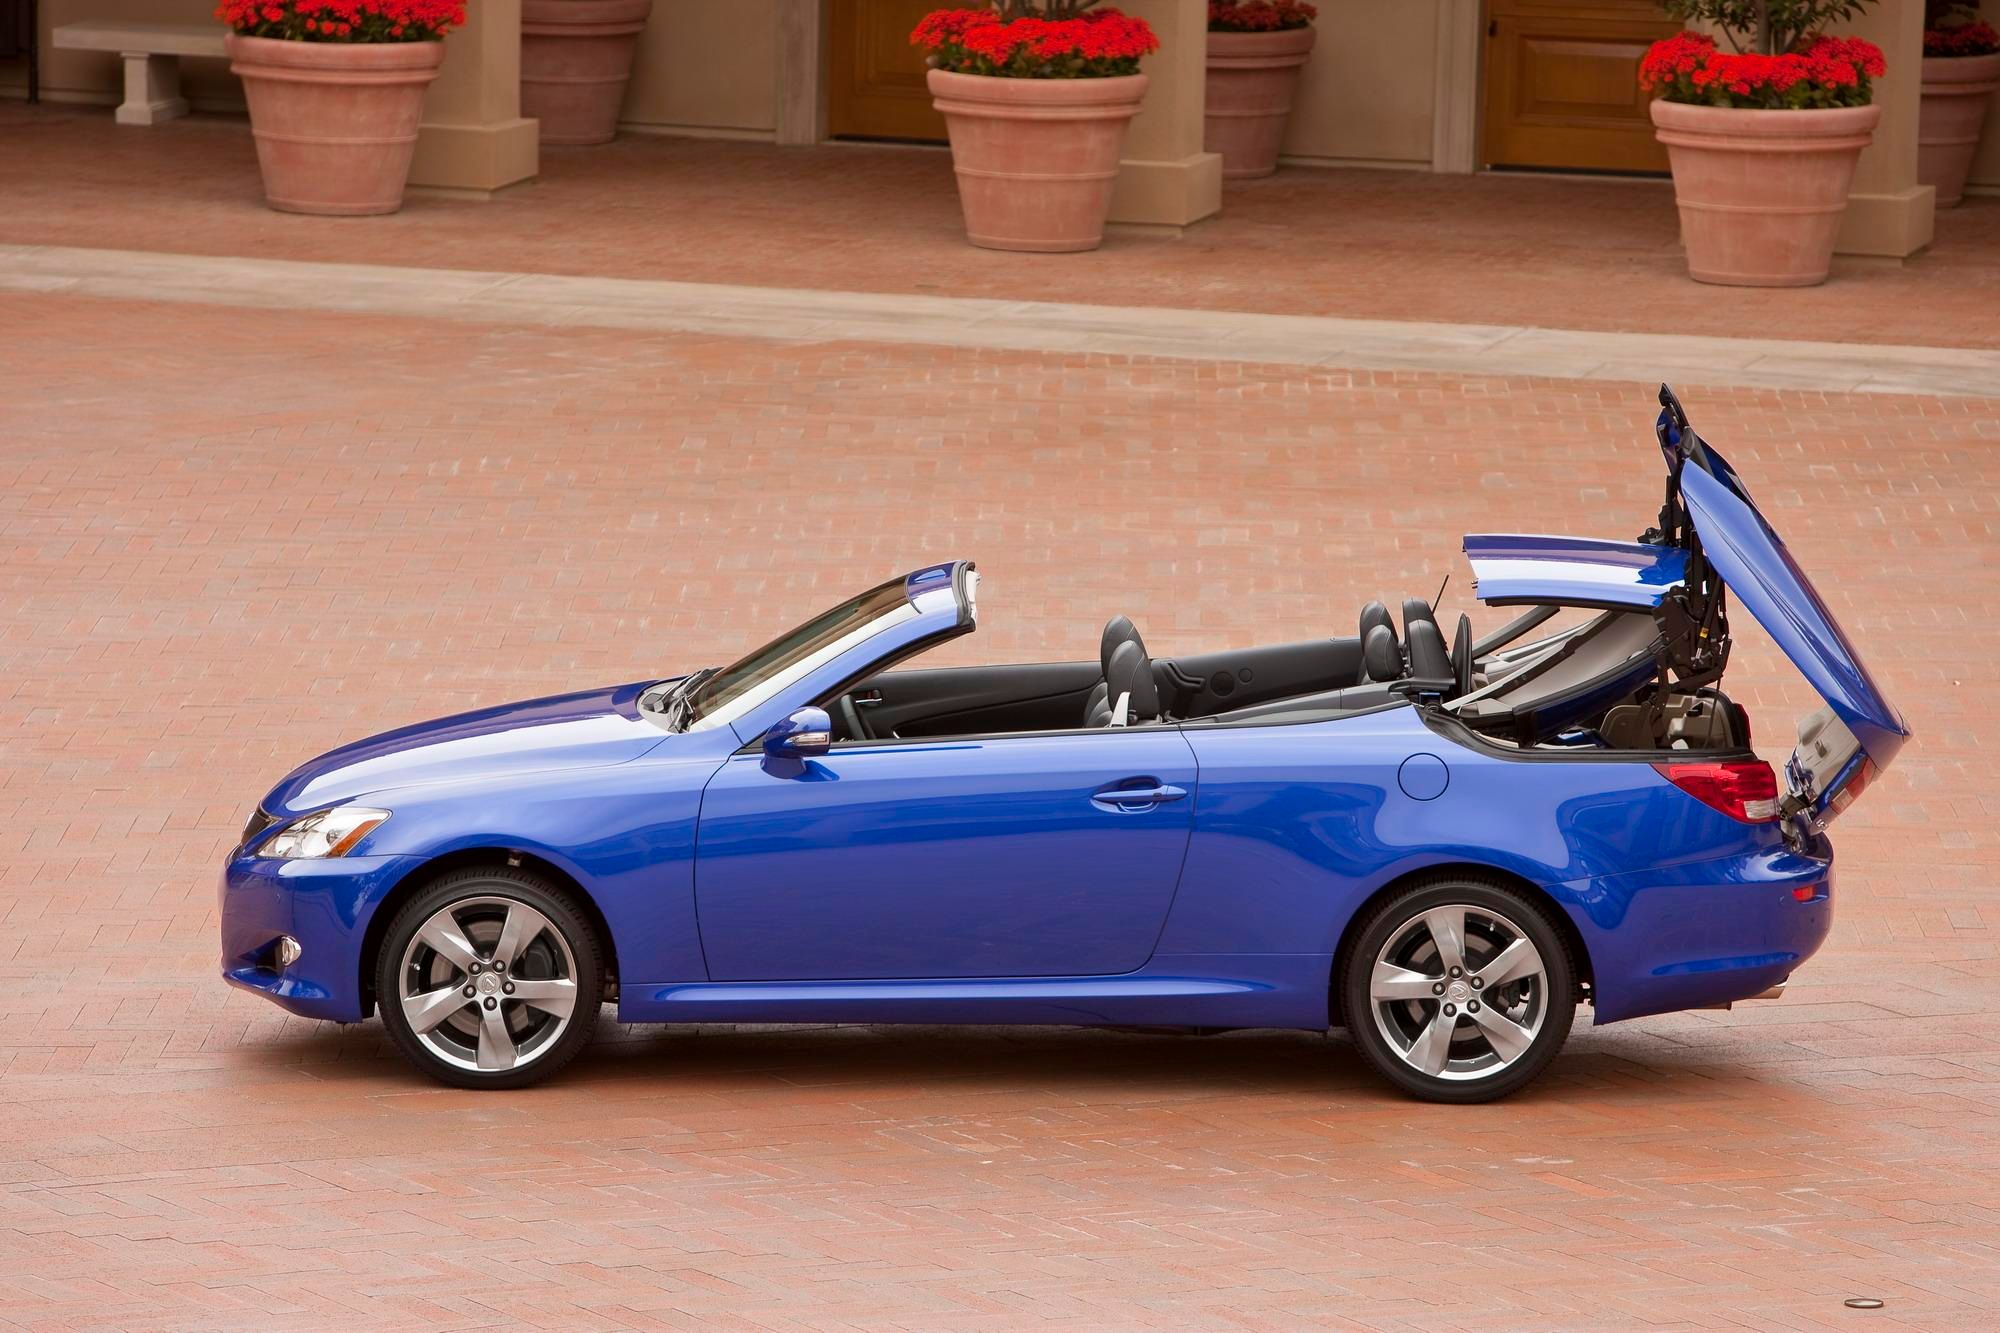 2010 Lexus IS250 and IS350 Convertible